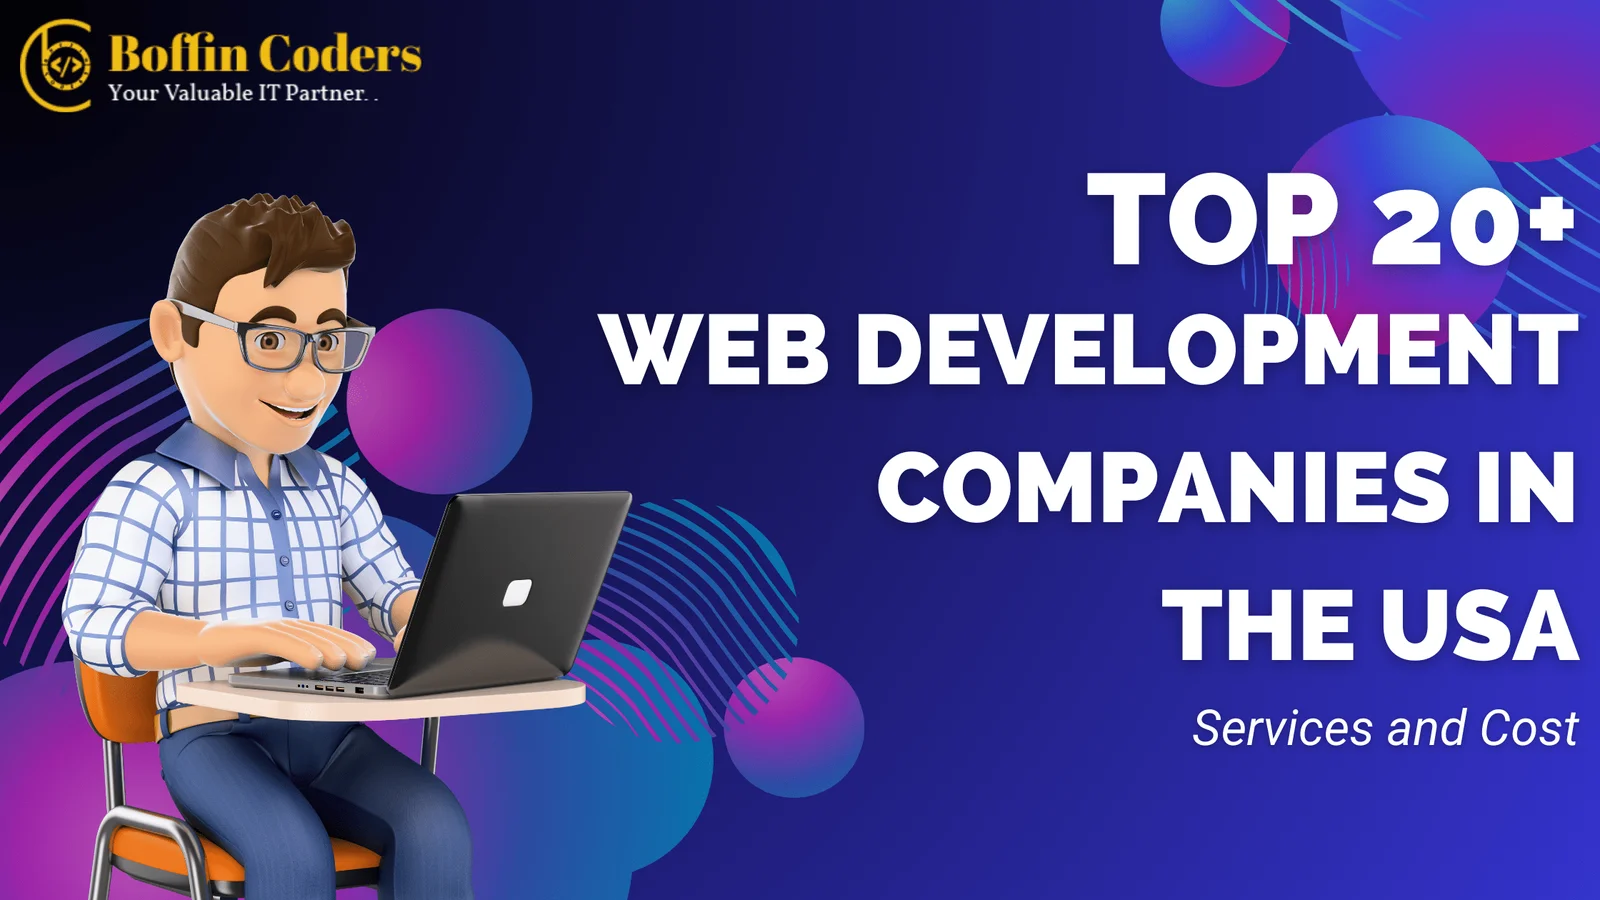 Top 20+ Web Development Companies in the USA: Services and Cost